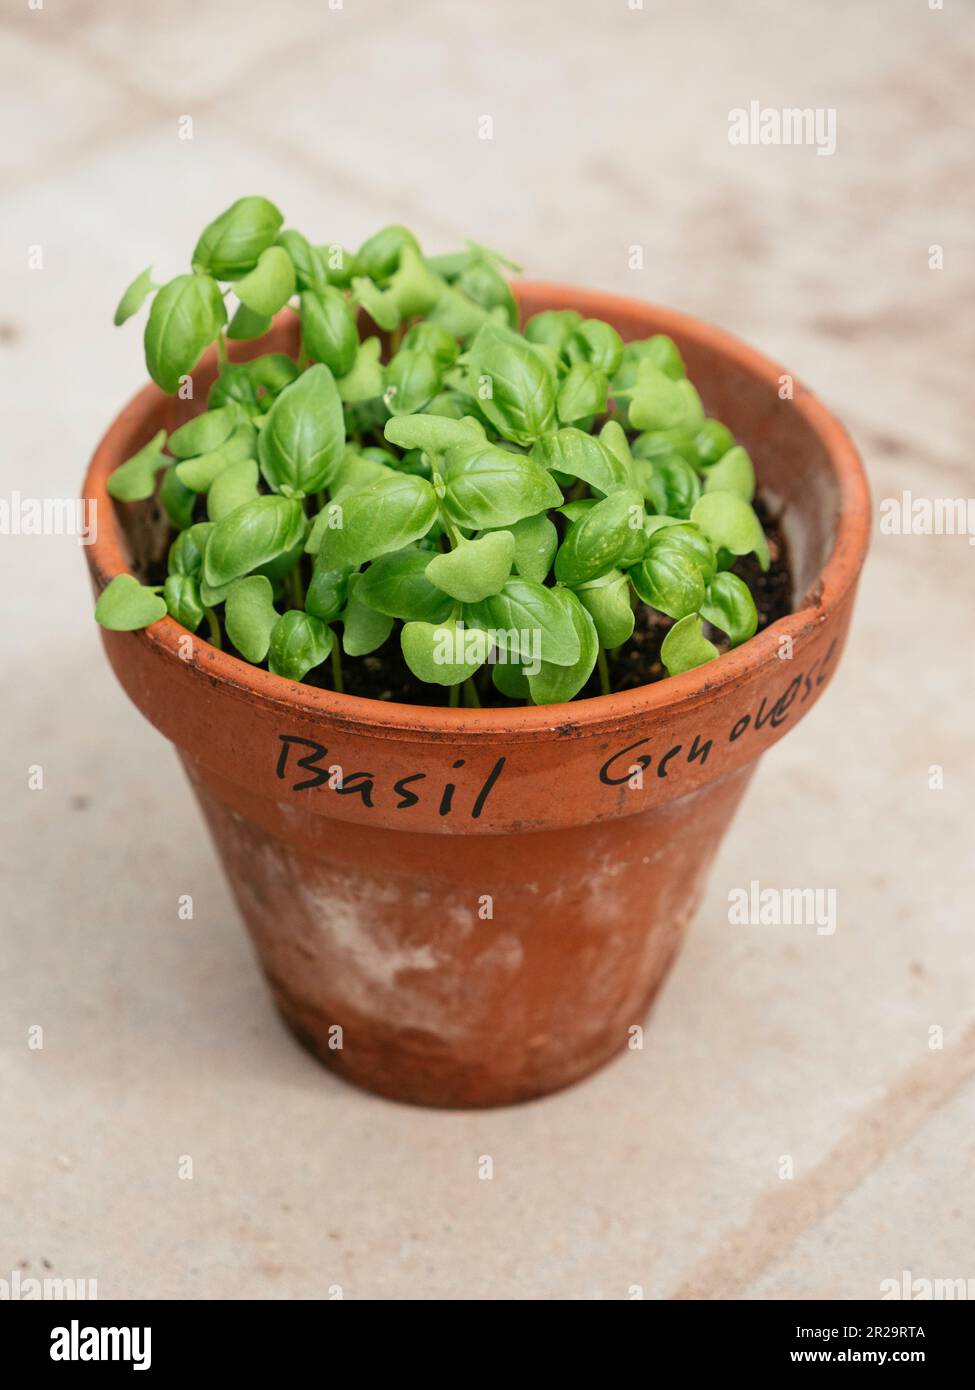 Genovese basil growing in a terra-cotta pot. Stock Photo